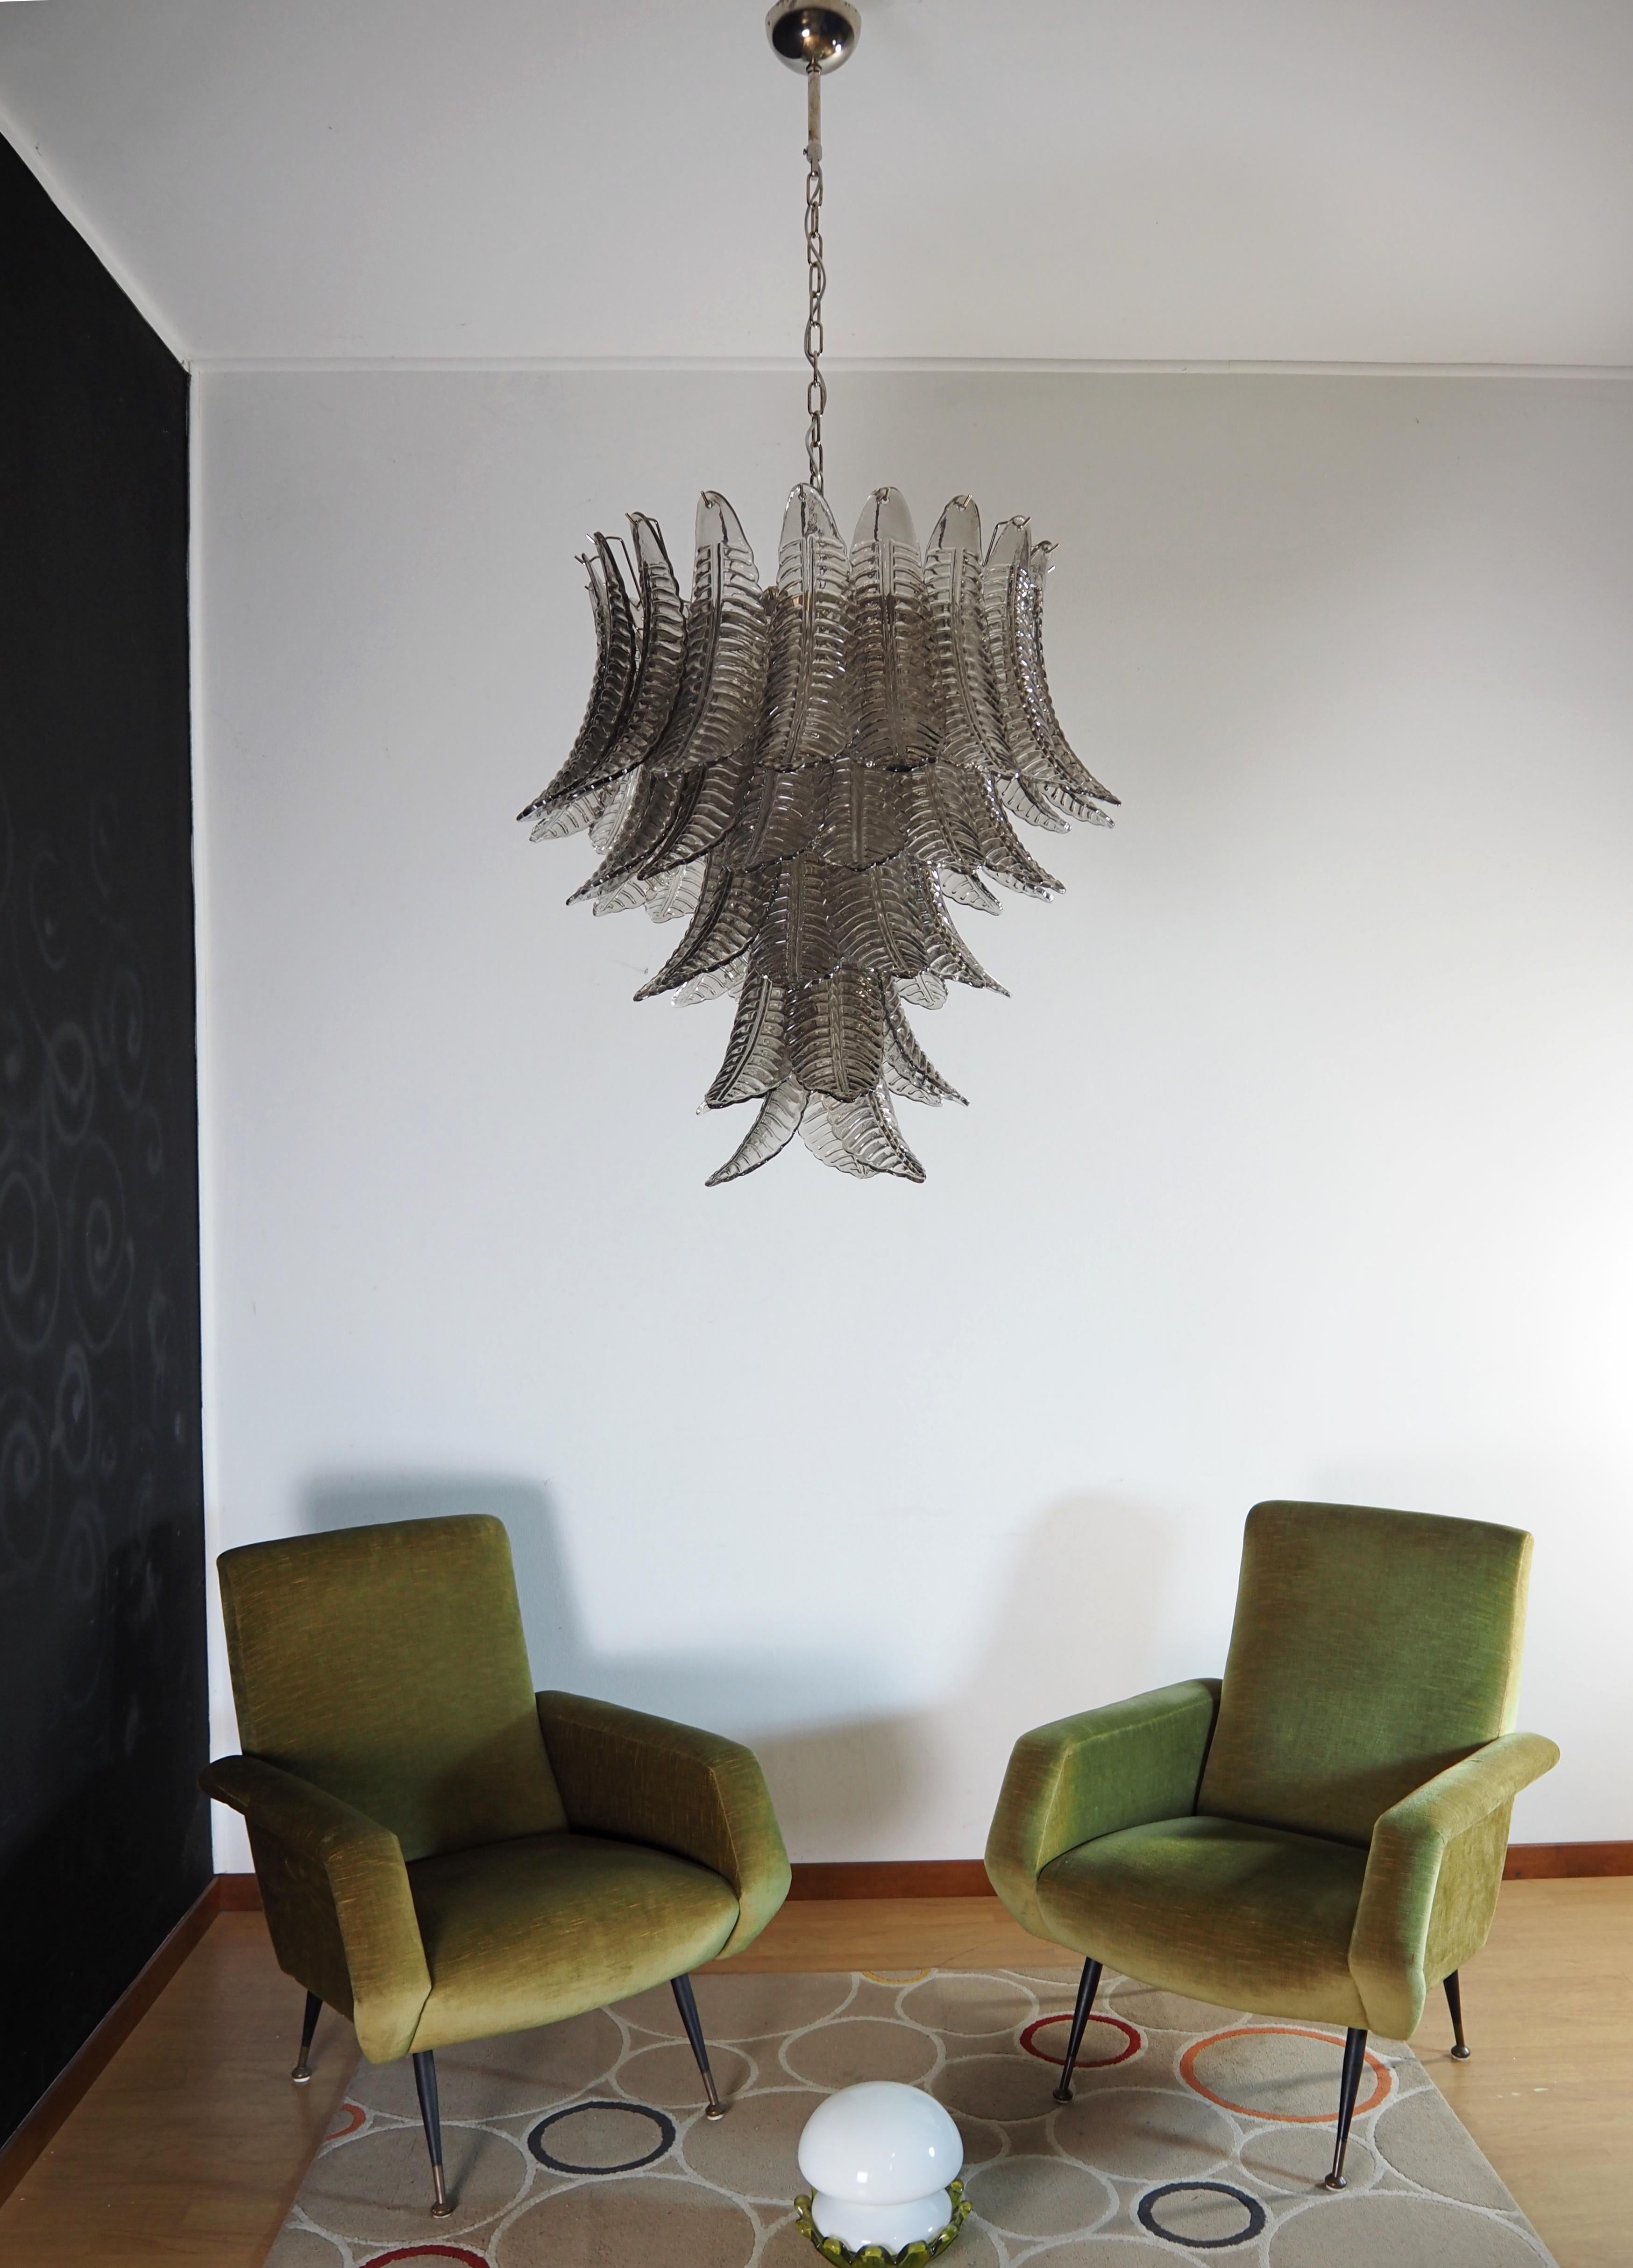 Beautiful and huge Italian Murano Chandelier composed of 52 splendid smoked glasses that give a very elegant look. The glasses of this chandelier are real works of art, the weight of this chandelier is 40 kg.
Period: late 20th century
Dimensions:61